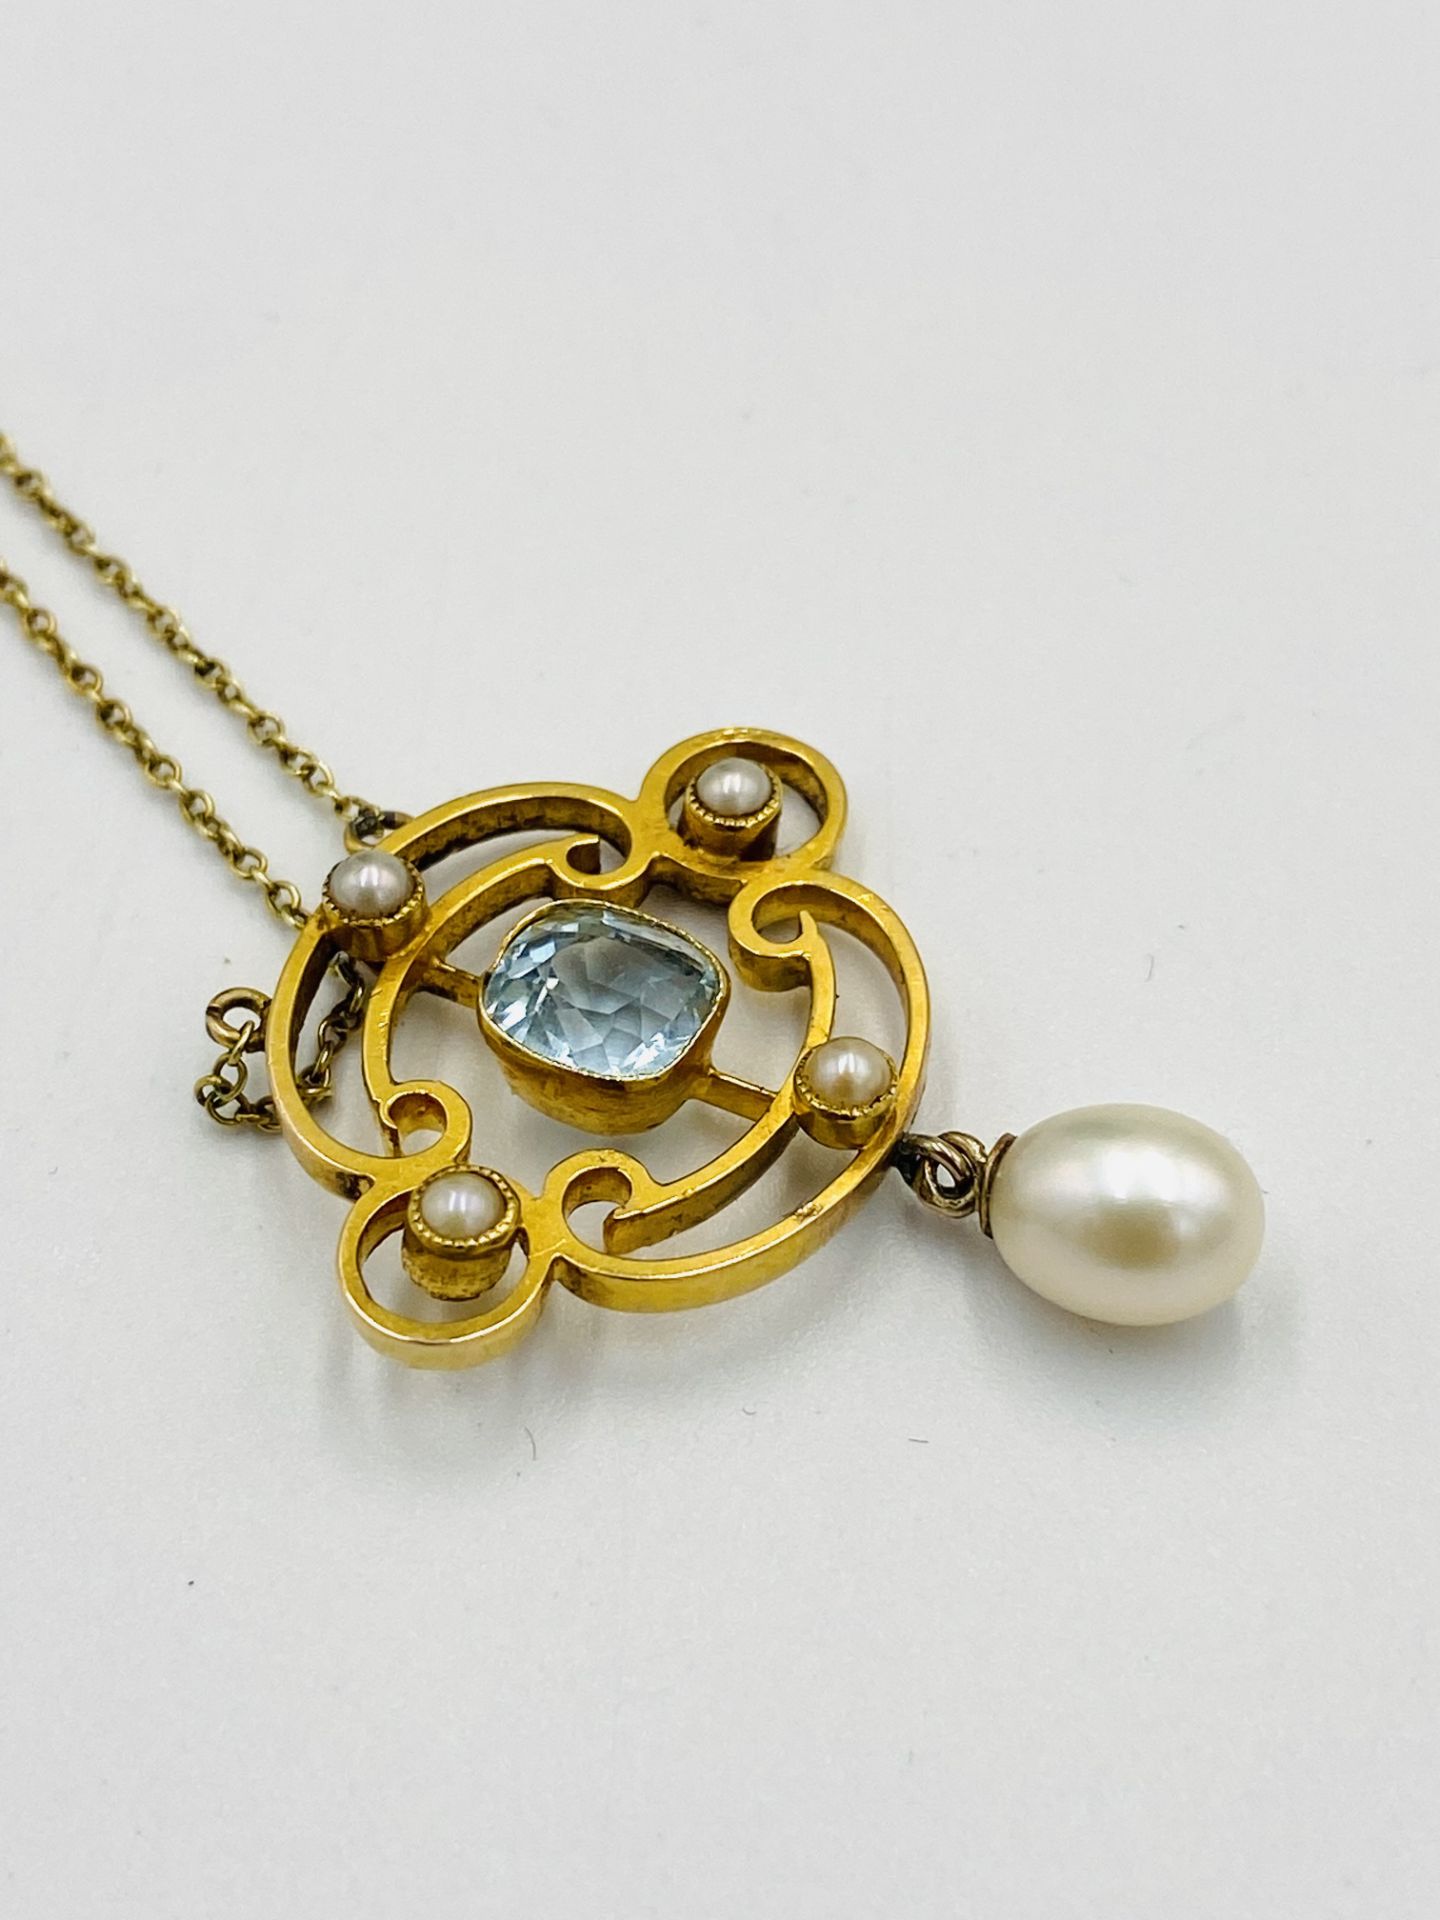 15ct gold pendant necklace - Image 2 of 4